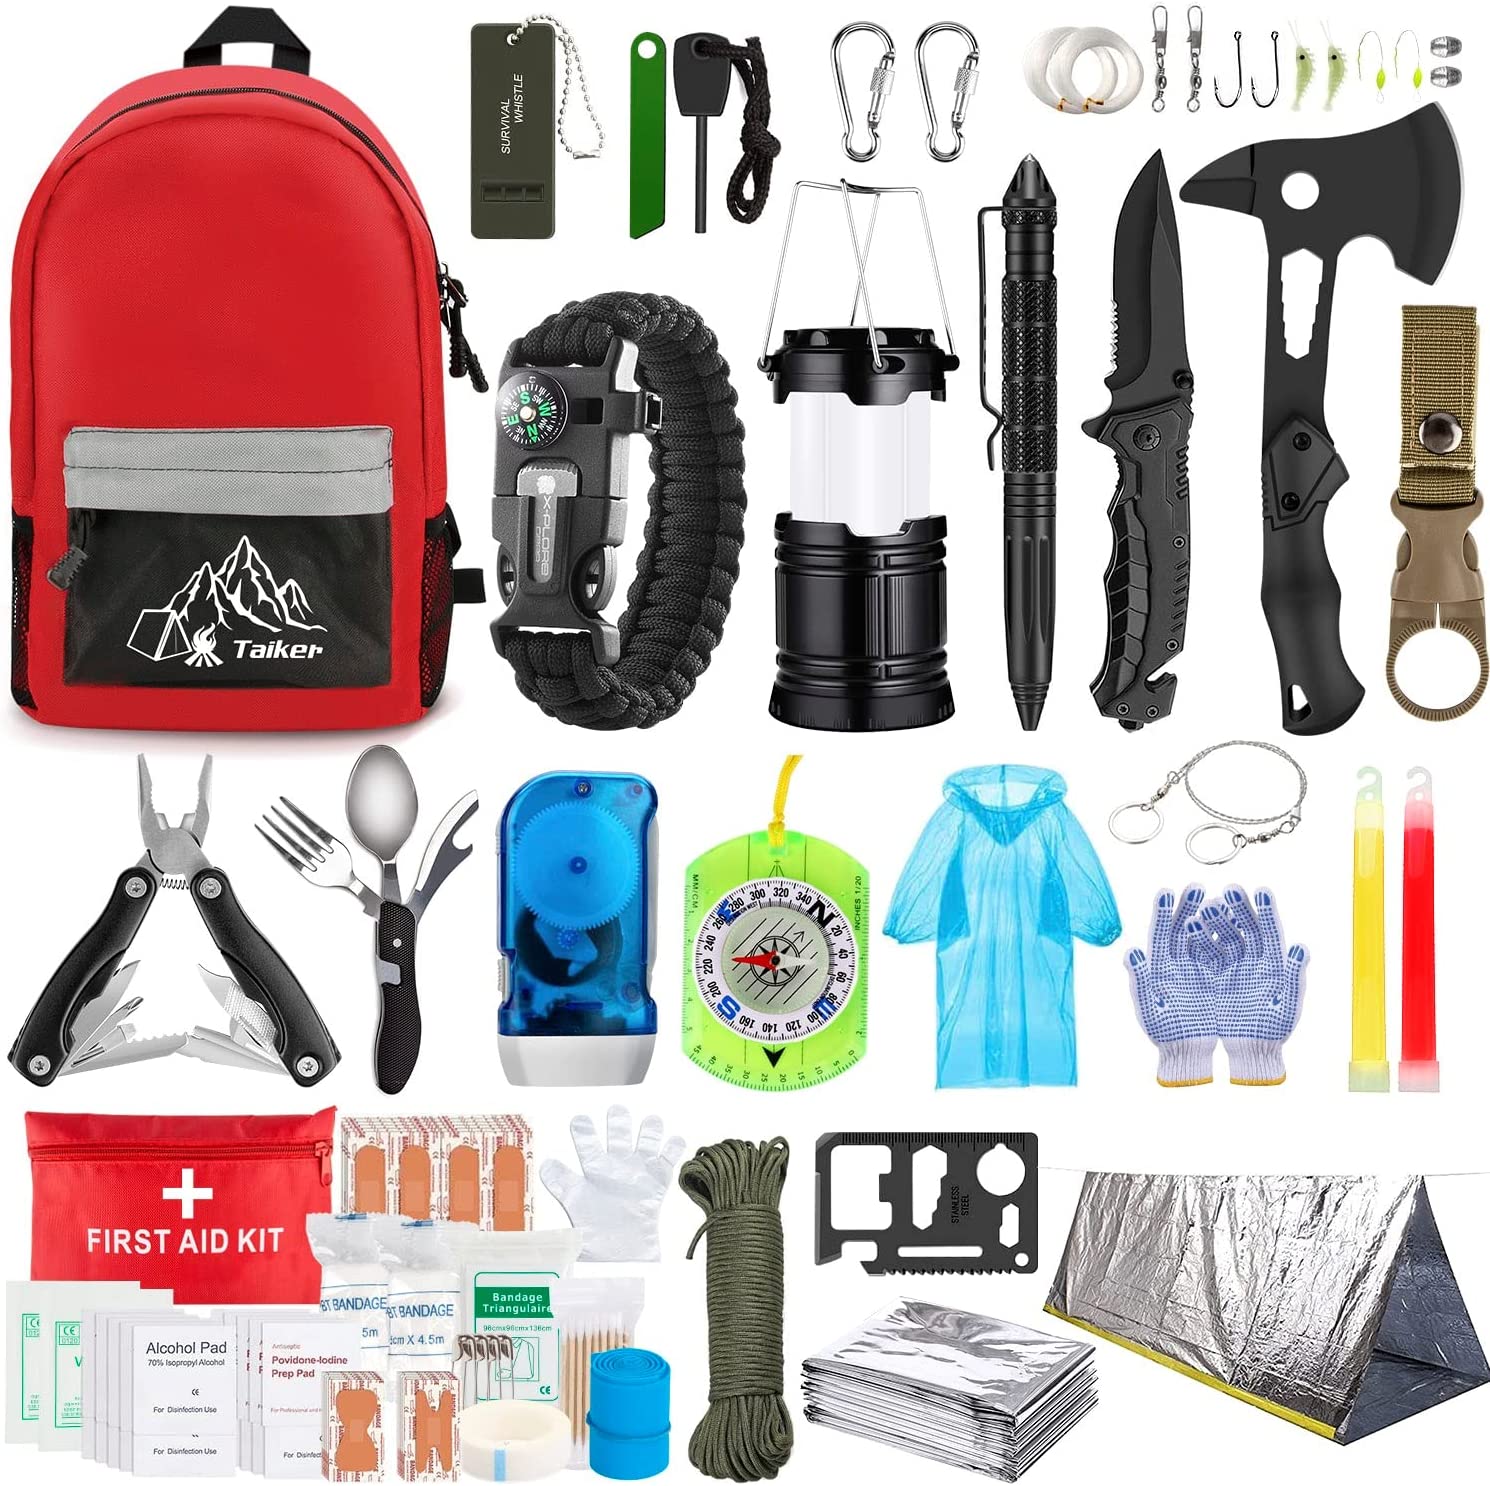 Emergency Survival Kit, 151 Pcs Survival Gear First Aid Kit, Outdoor Trauma Bag with Tactical Flashlight Knife Pliers Pen Blanket Bracelets Compass for Camping Earthquake or Adventures